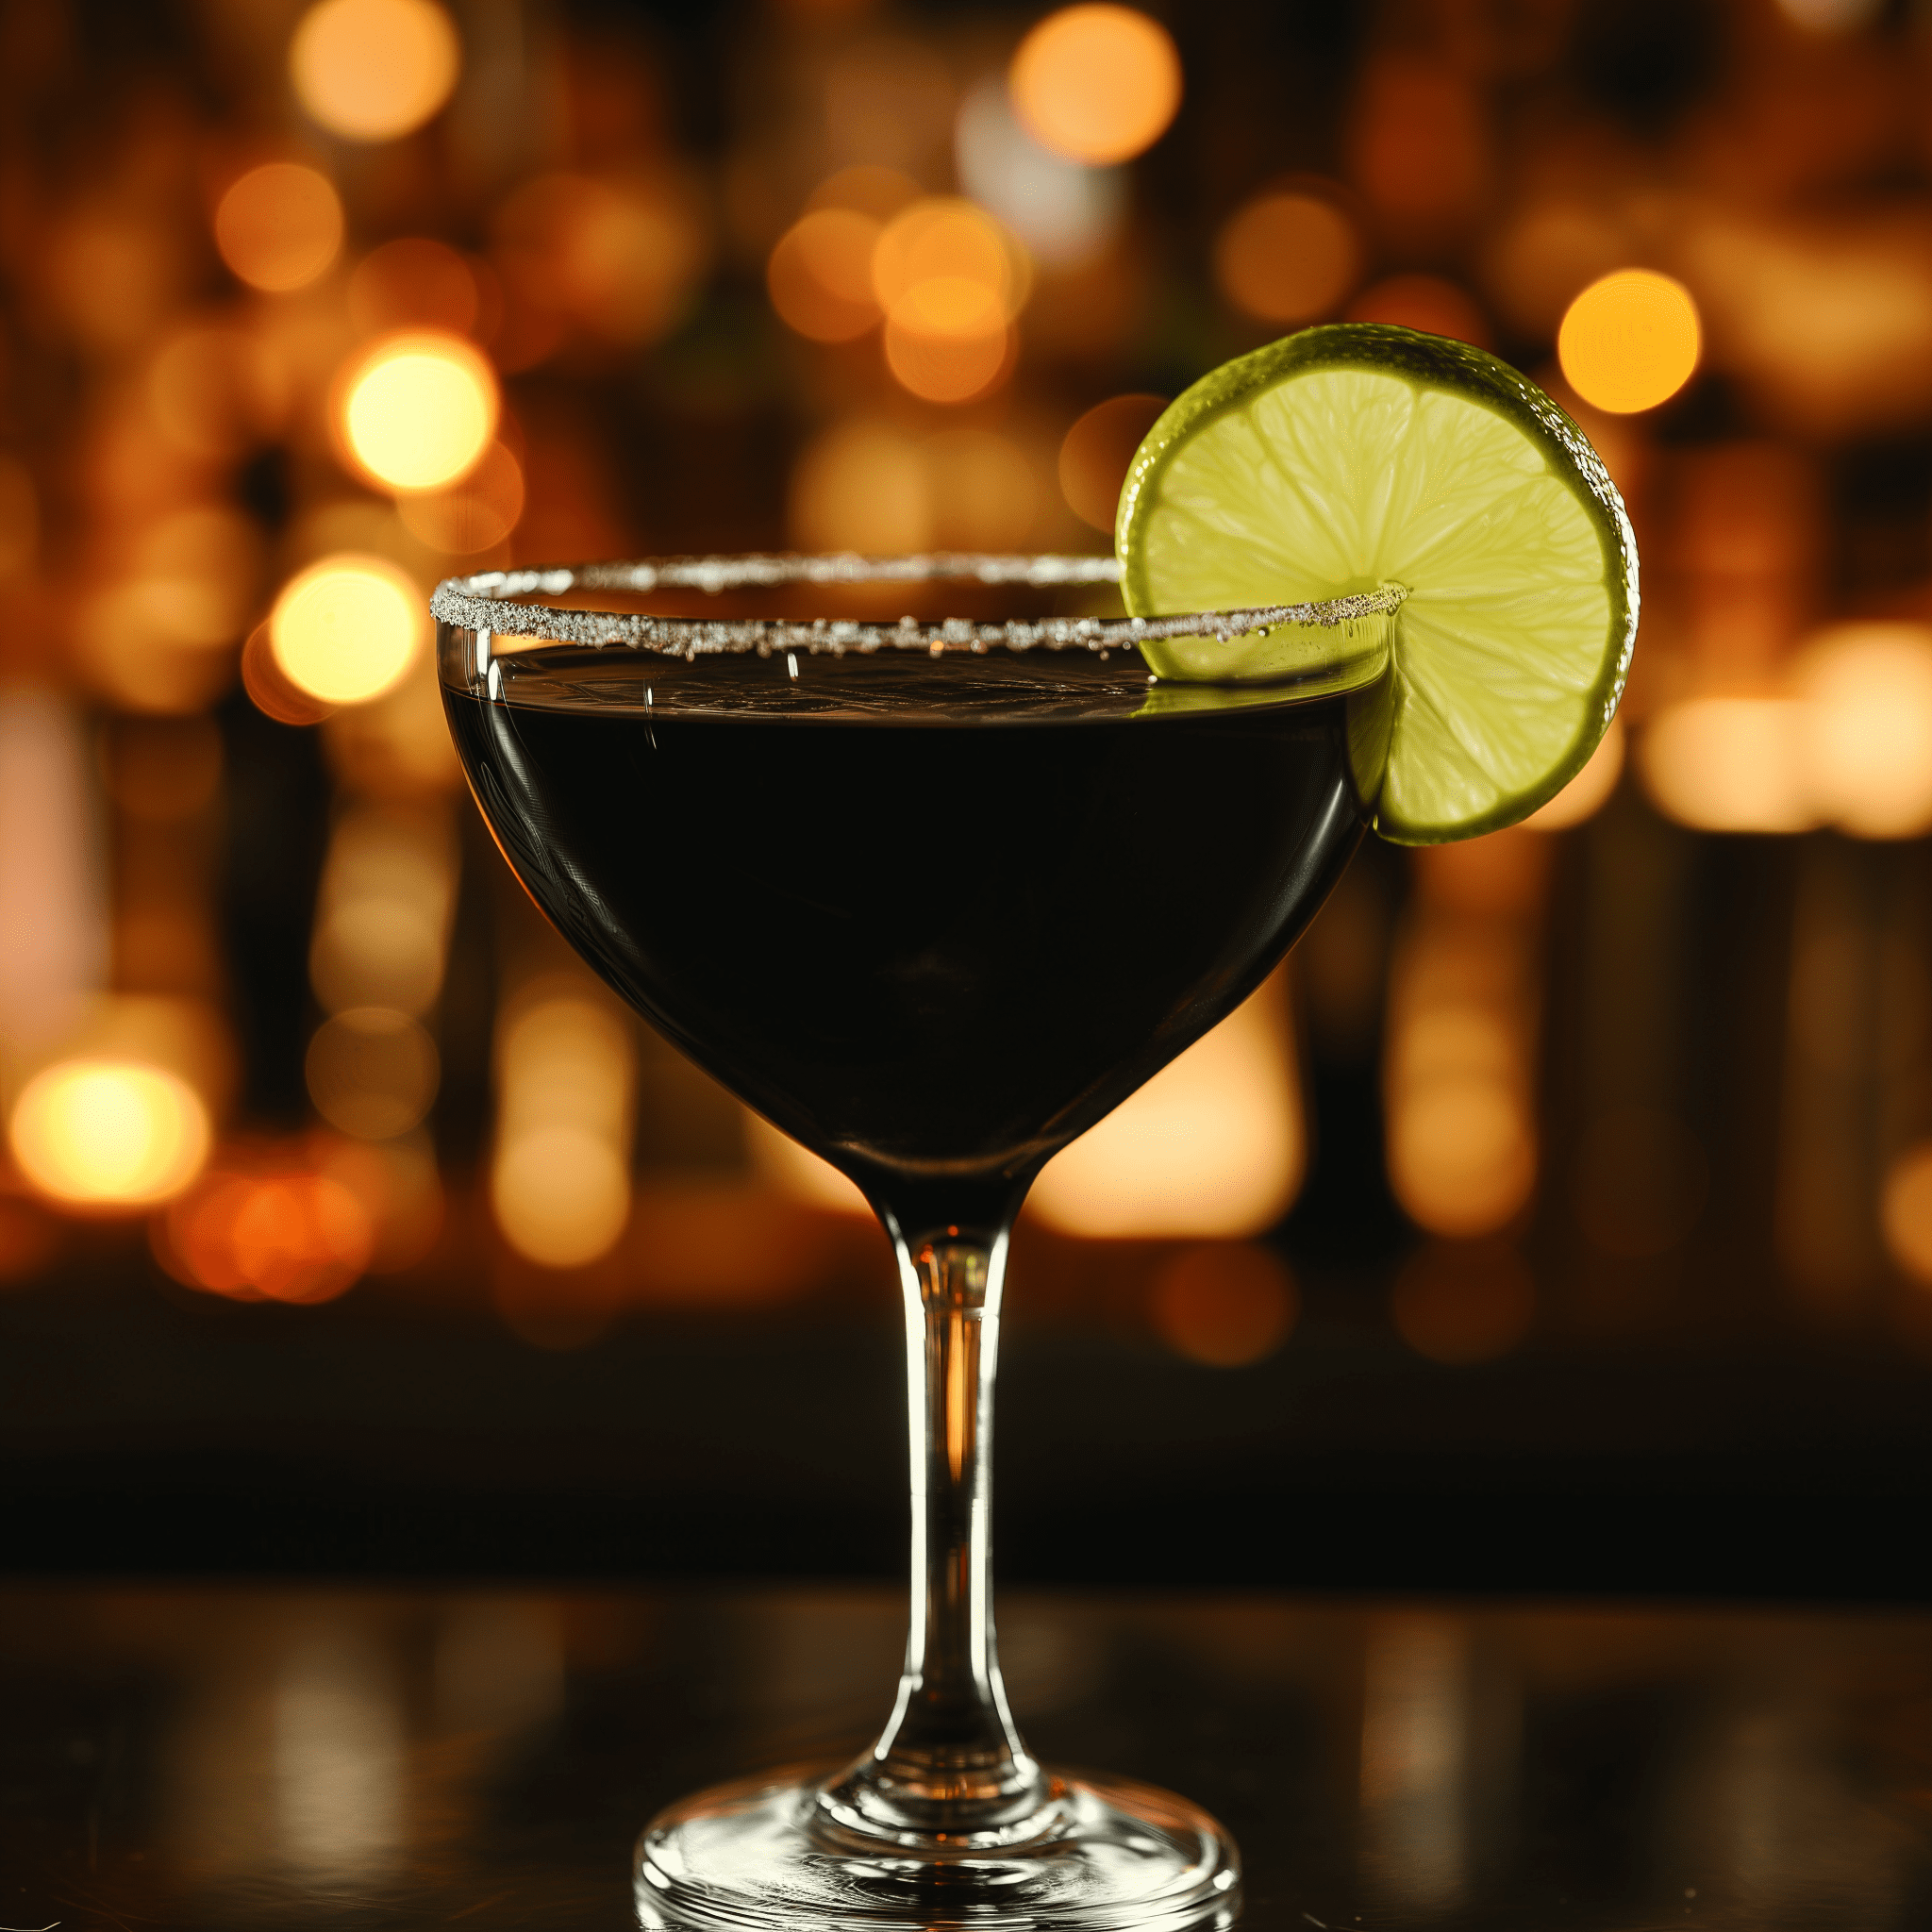 Black Daiquiri Cocktail Recipe - The Black Daiquiri has a rich, velvety texture with a balance of sweet and tart flavors. The dark rum provides a warm, caramel-like undertone, while the lime juice adds a refreshing citrus kick. It's a bold, full-bodied cocktail with a lingering finish.